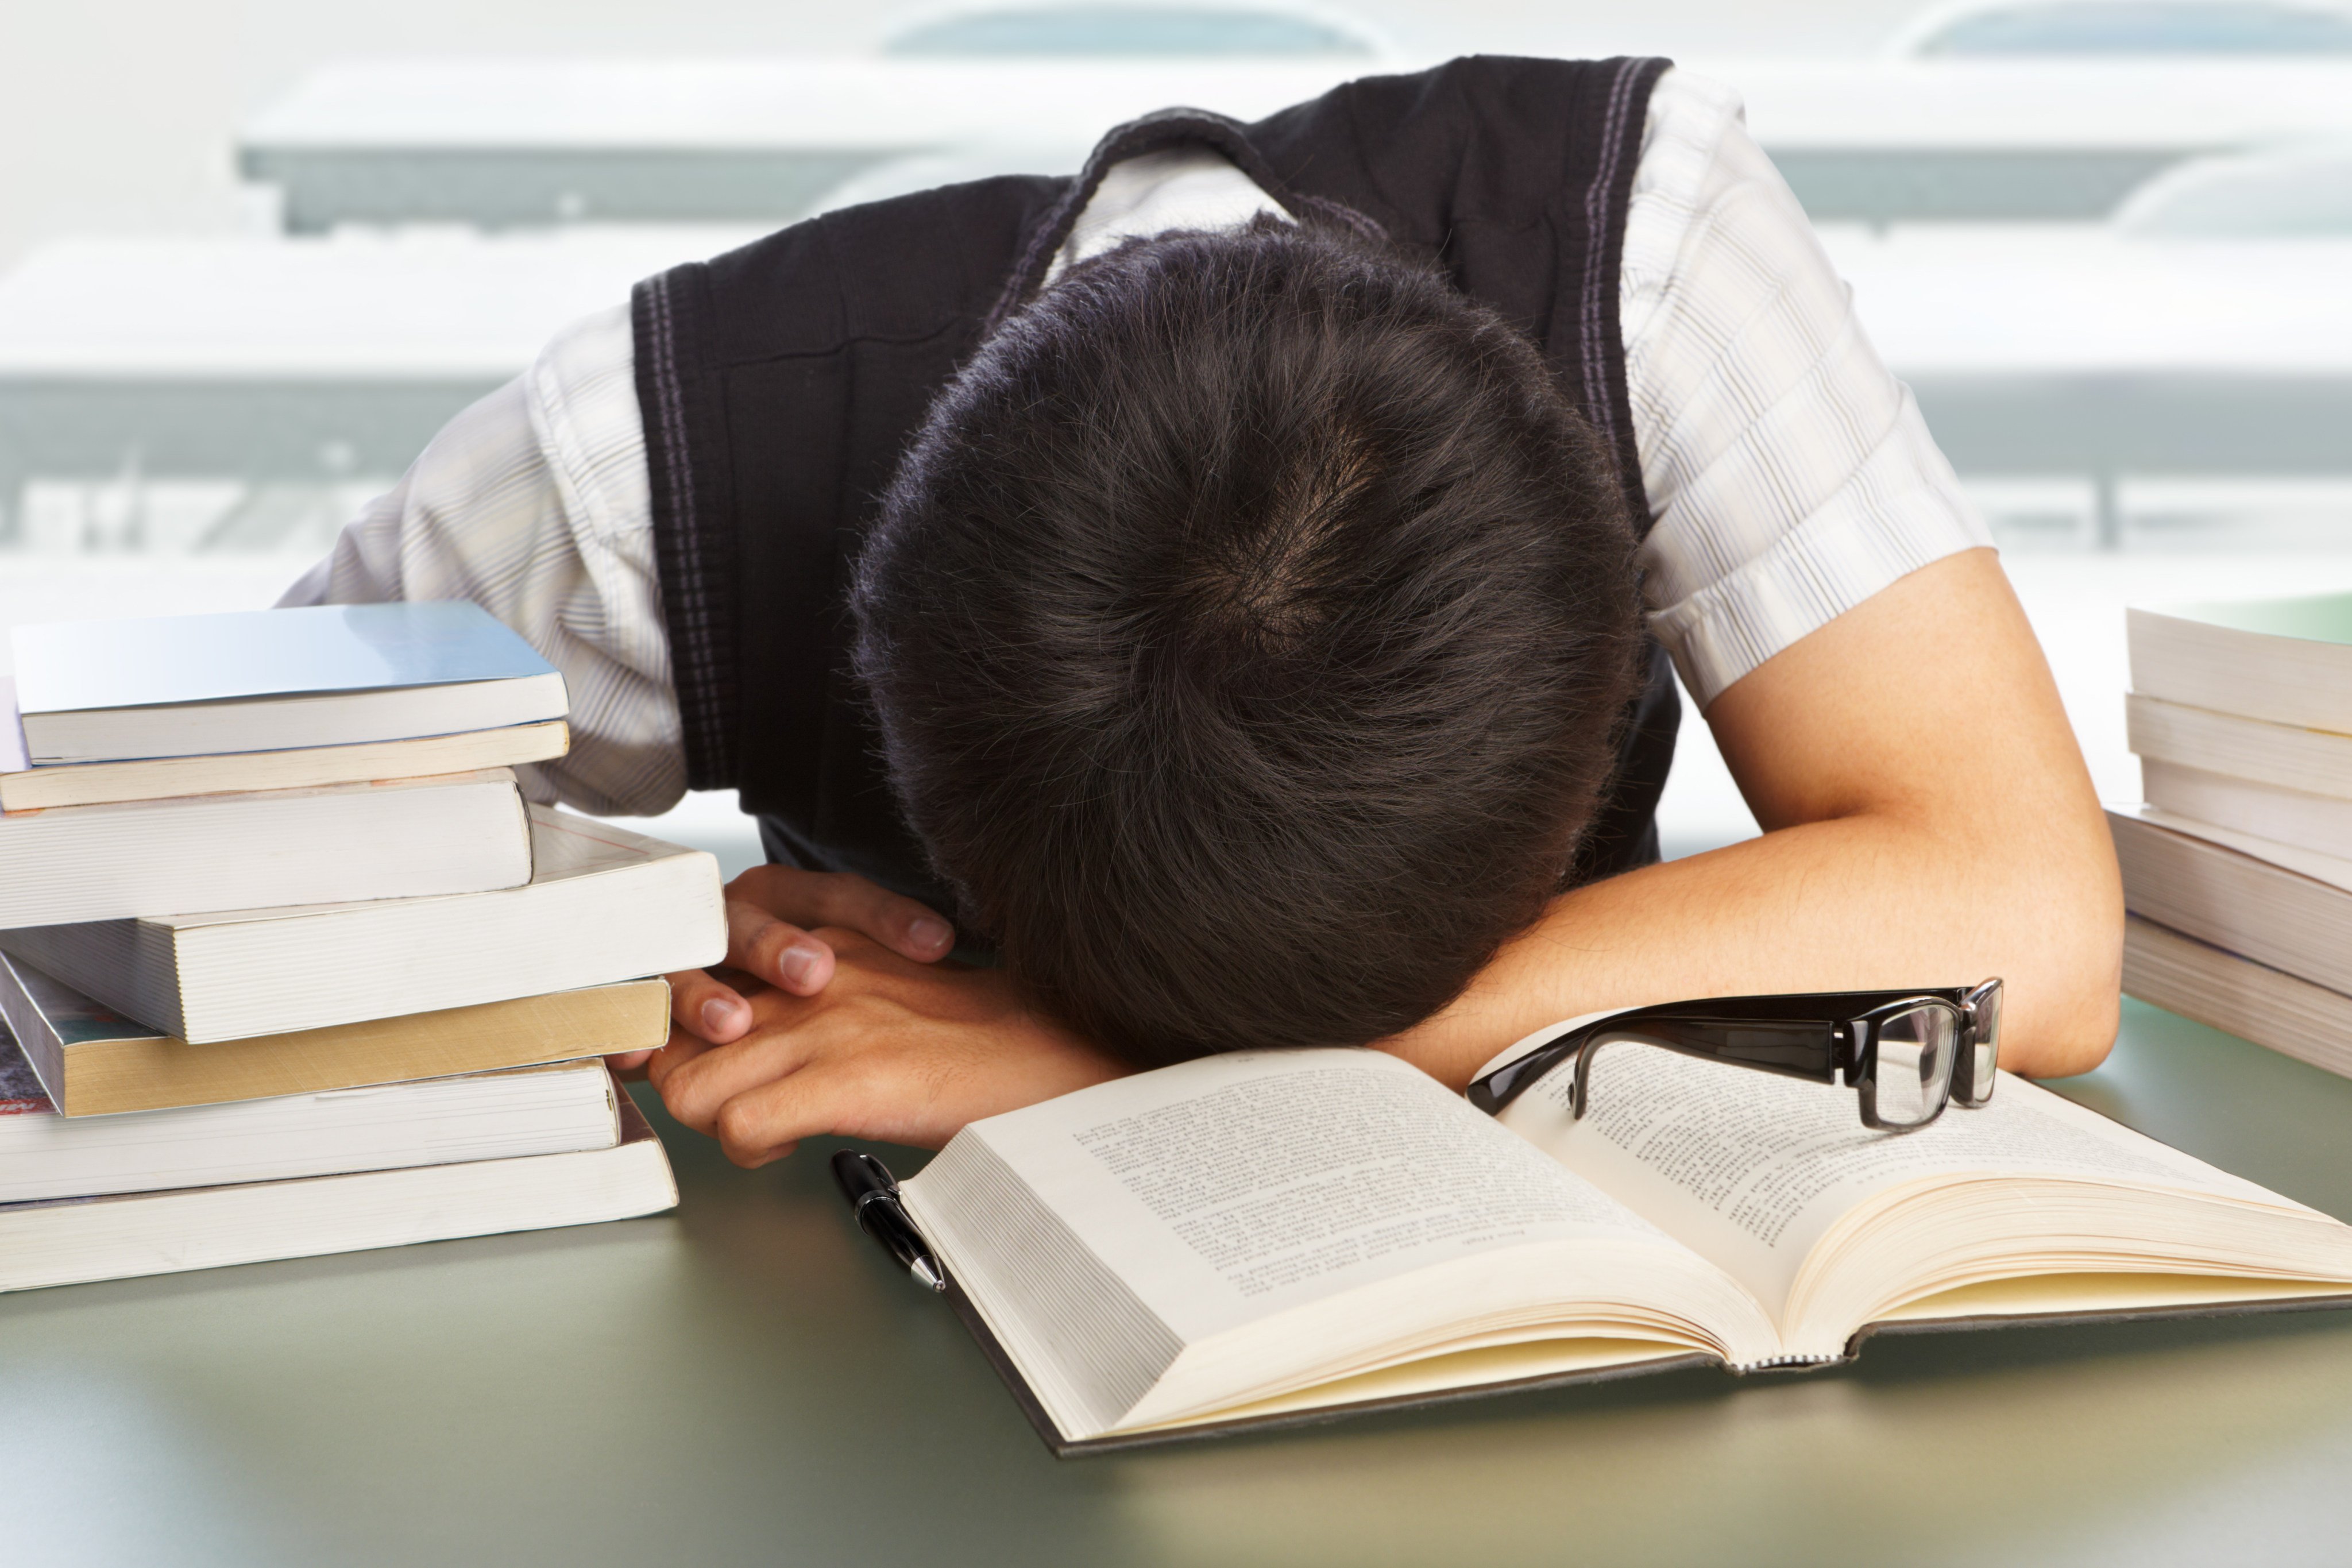 School-related problems were among issues identified as causing mental health issues. Photo: Shutterstock